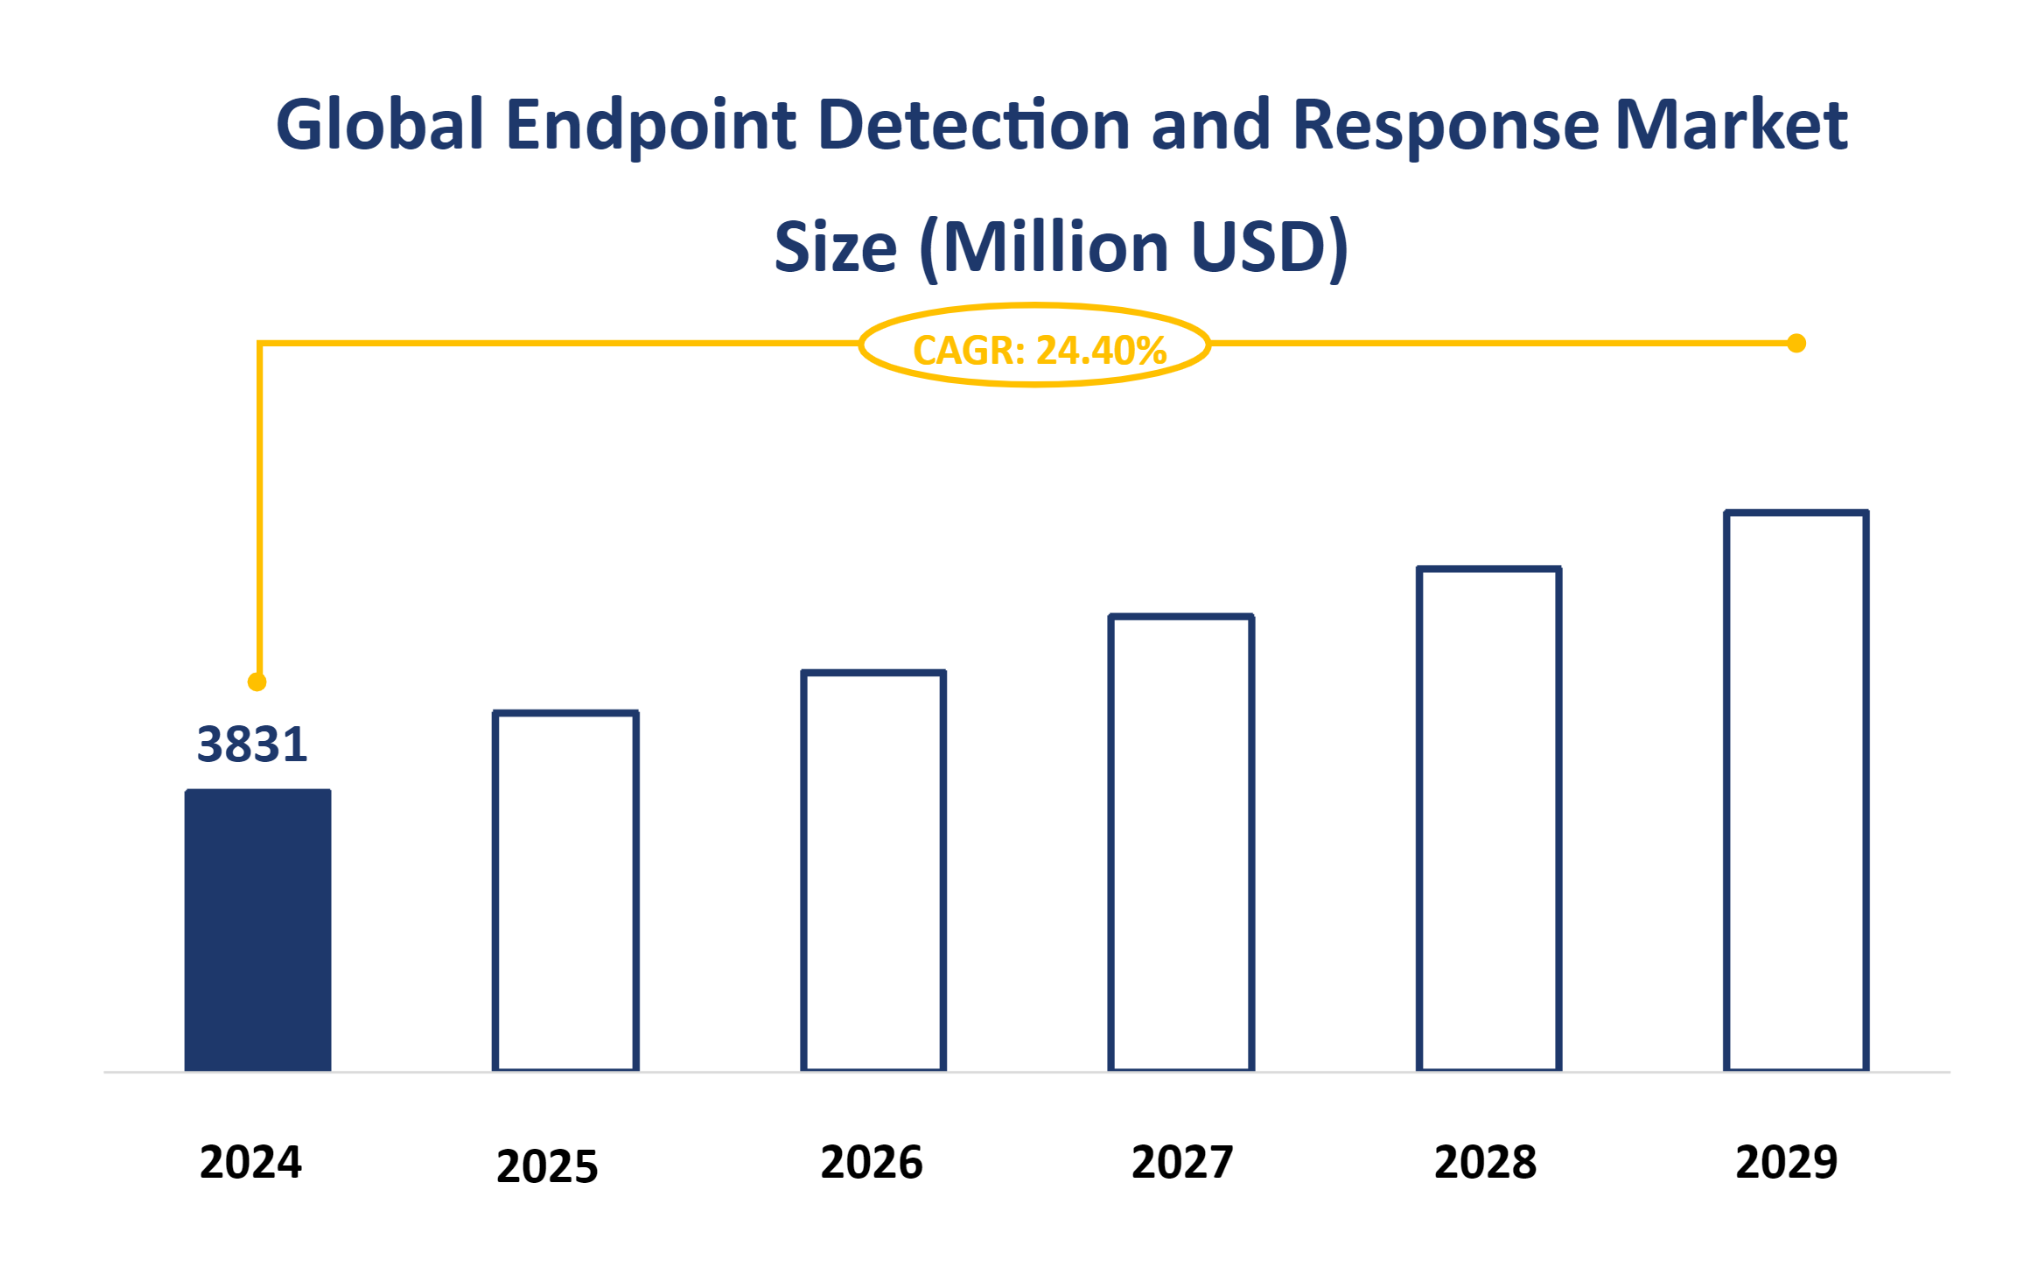 Global Endpoint Detection and Response Market Size (Million USD)